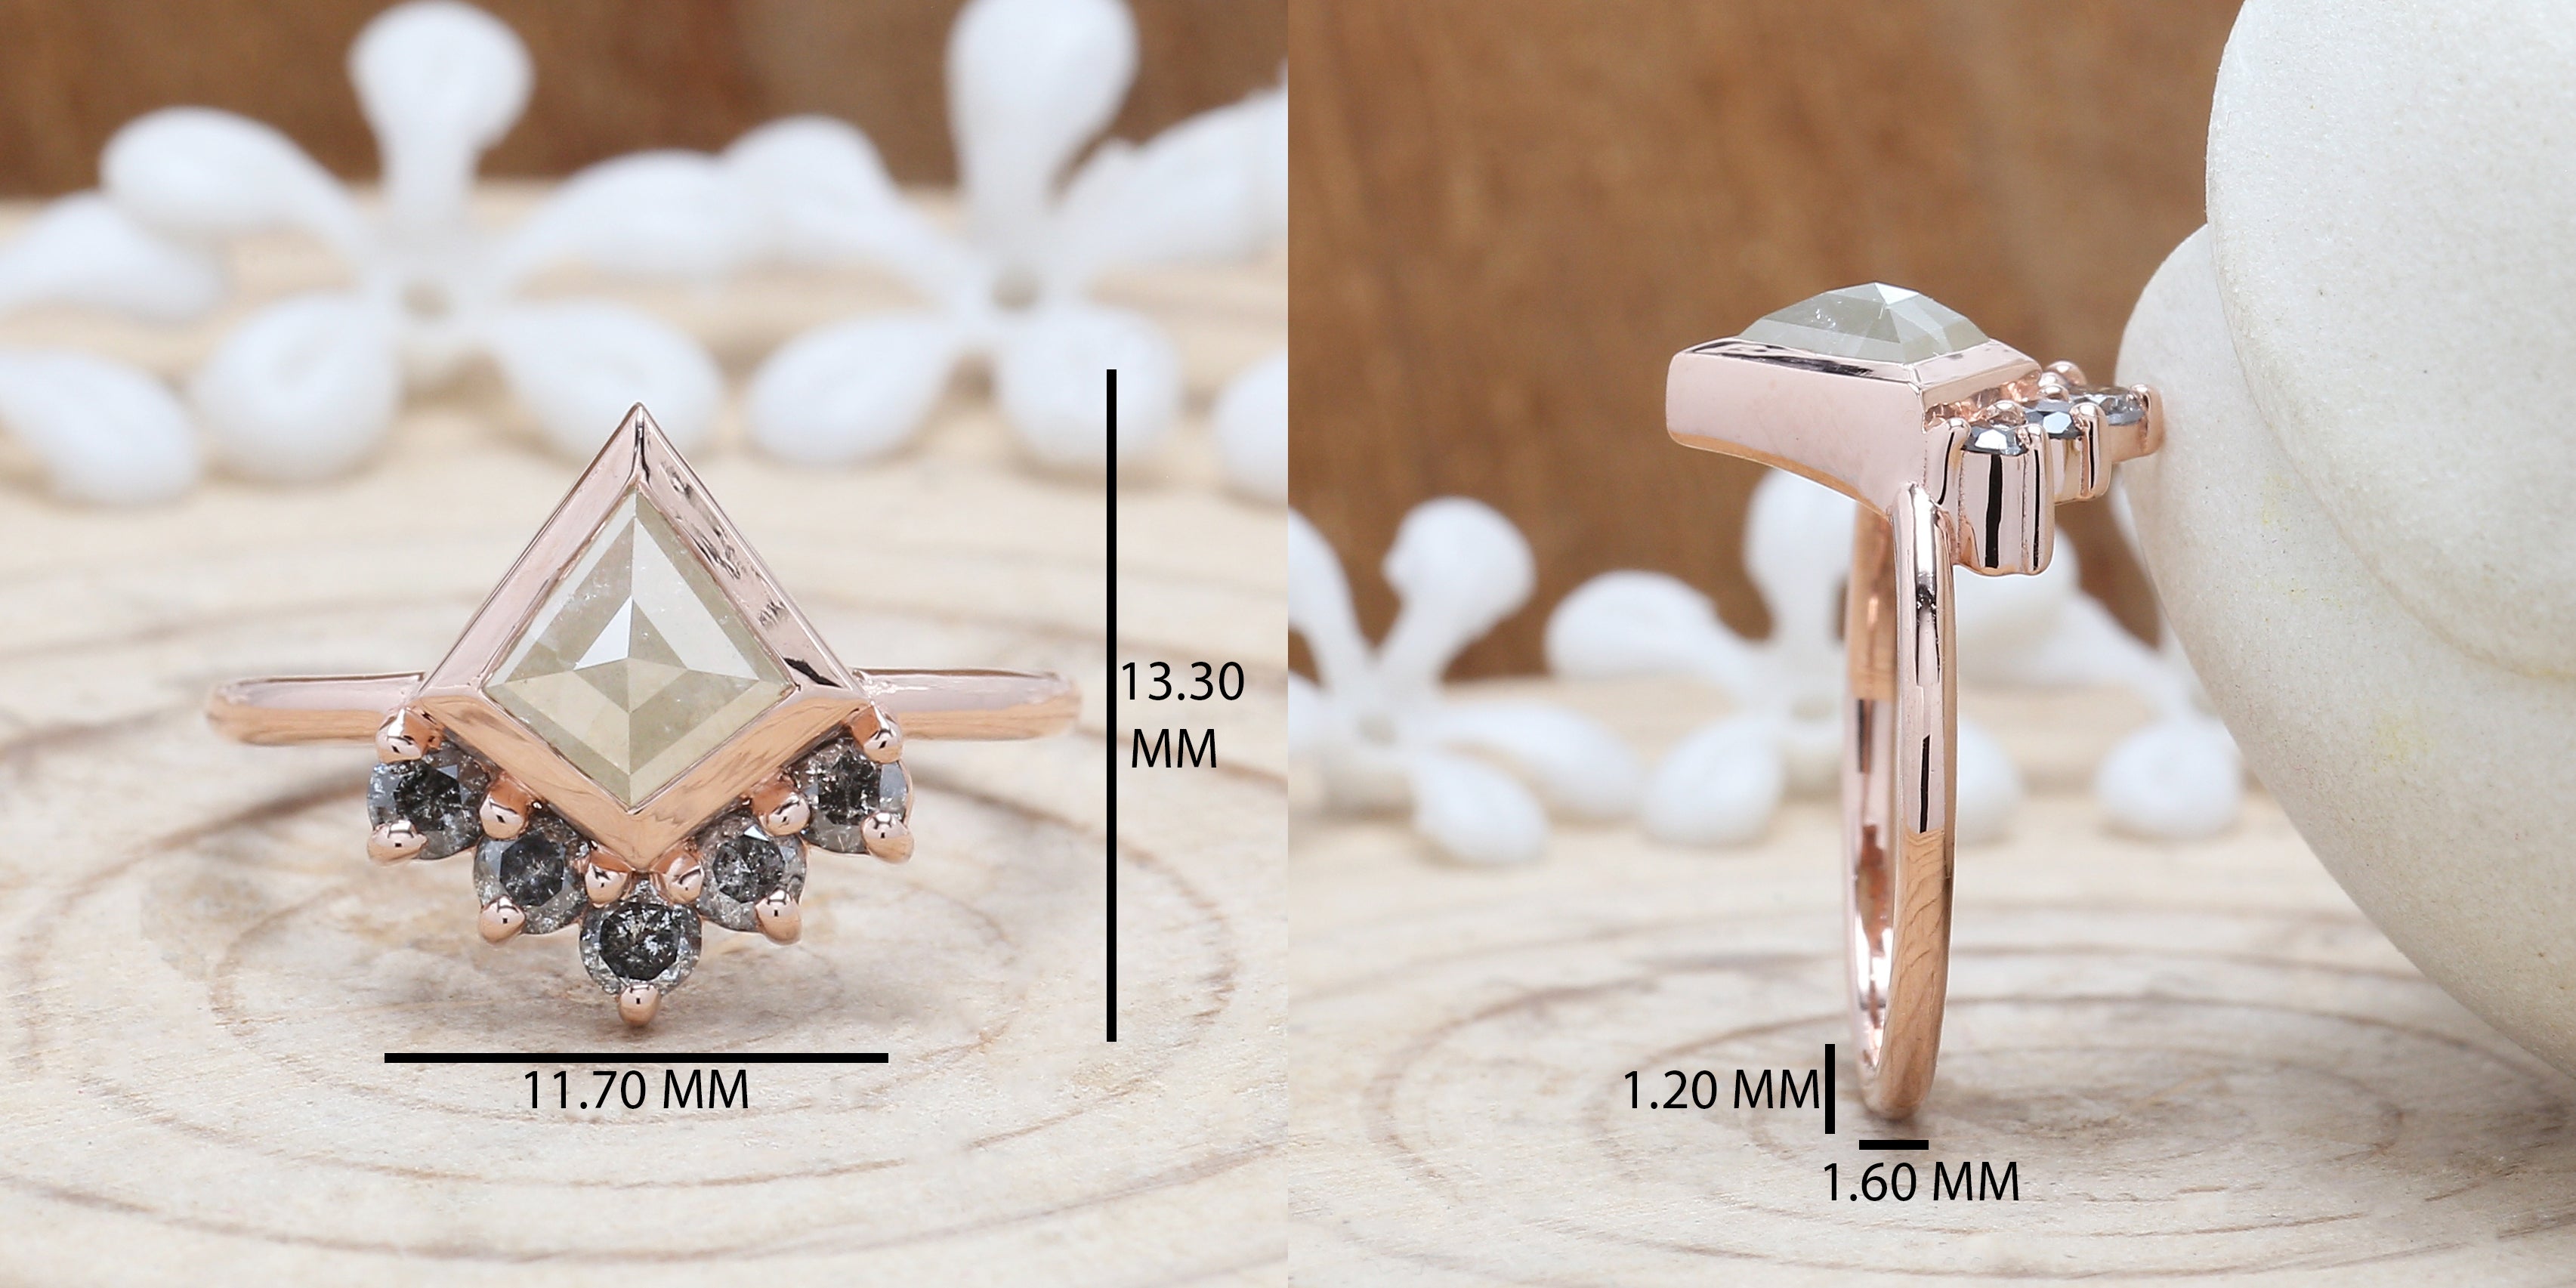 Kite Cut Grey Color Diamond Ring 1.27 Ct 8.00 MM Kite Shape Diamond Ring 14K Solid Rose Gold Silver Kite Engagement Ring Gift For Her QN8418